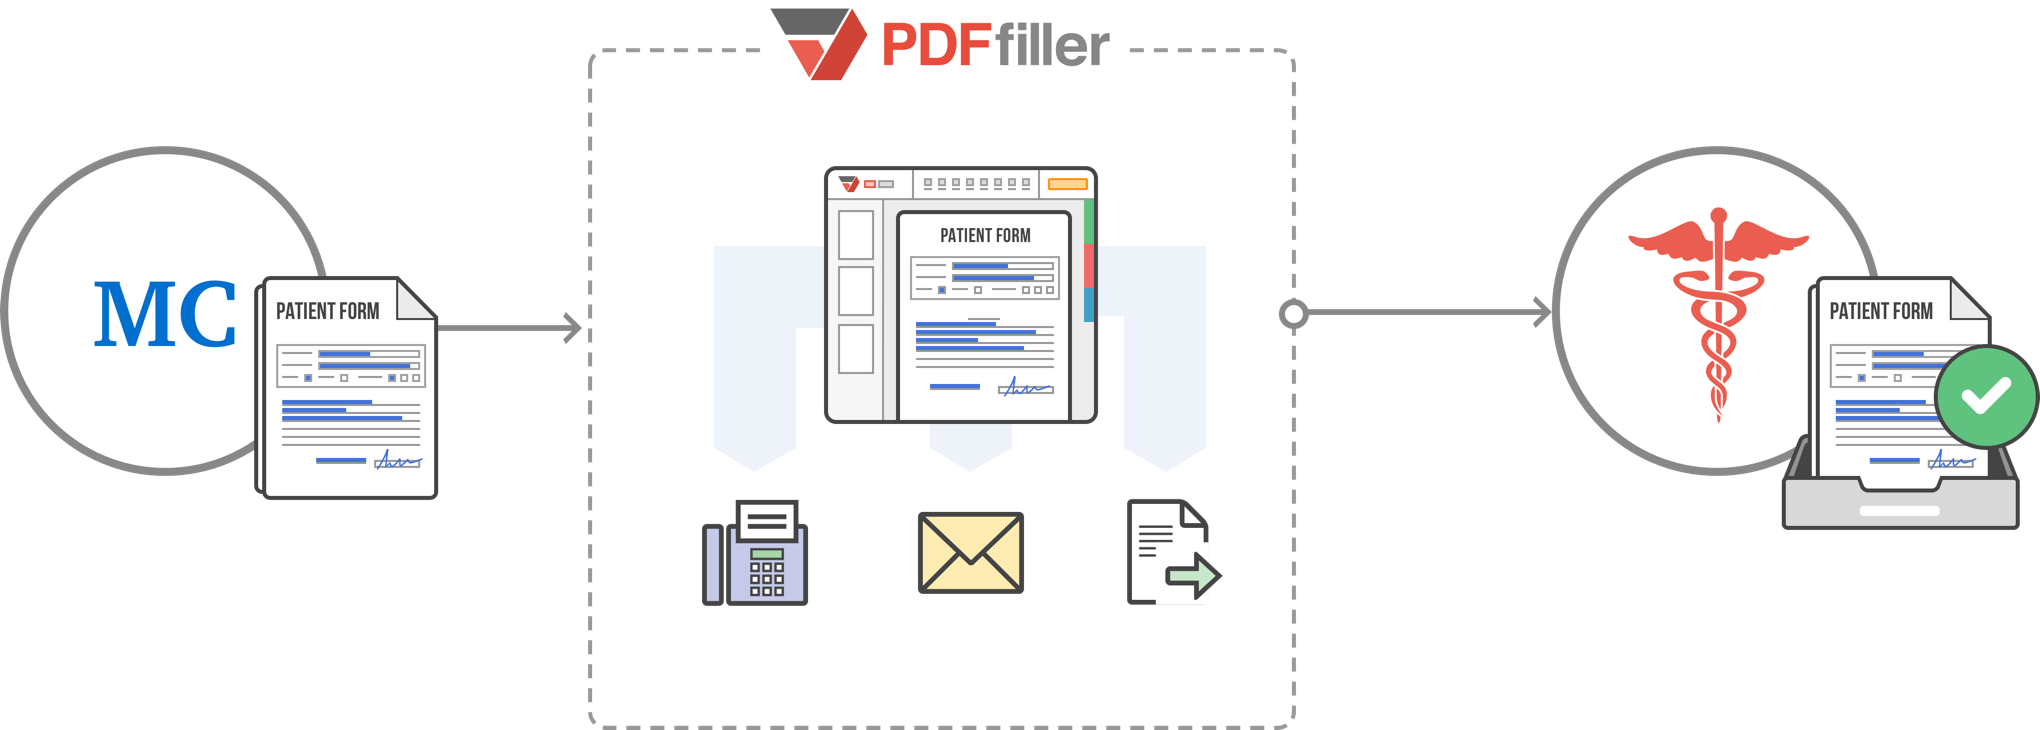 Fig B. – Send patient files safely and securely with PDFfiller.